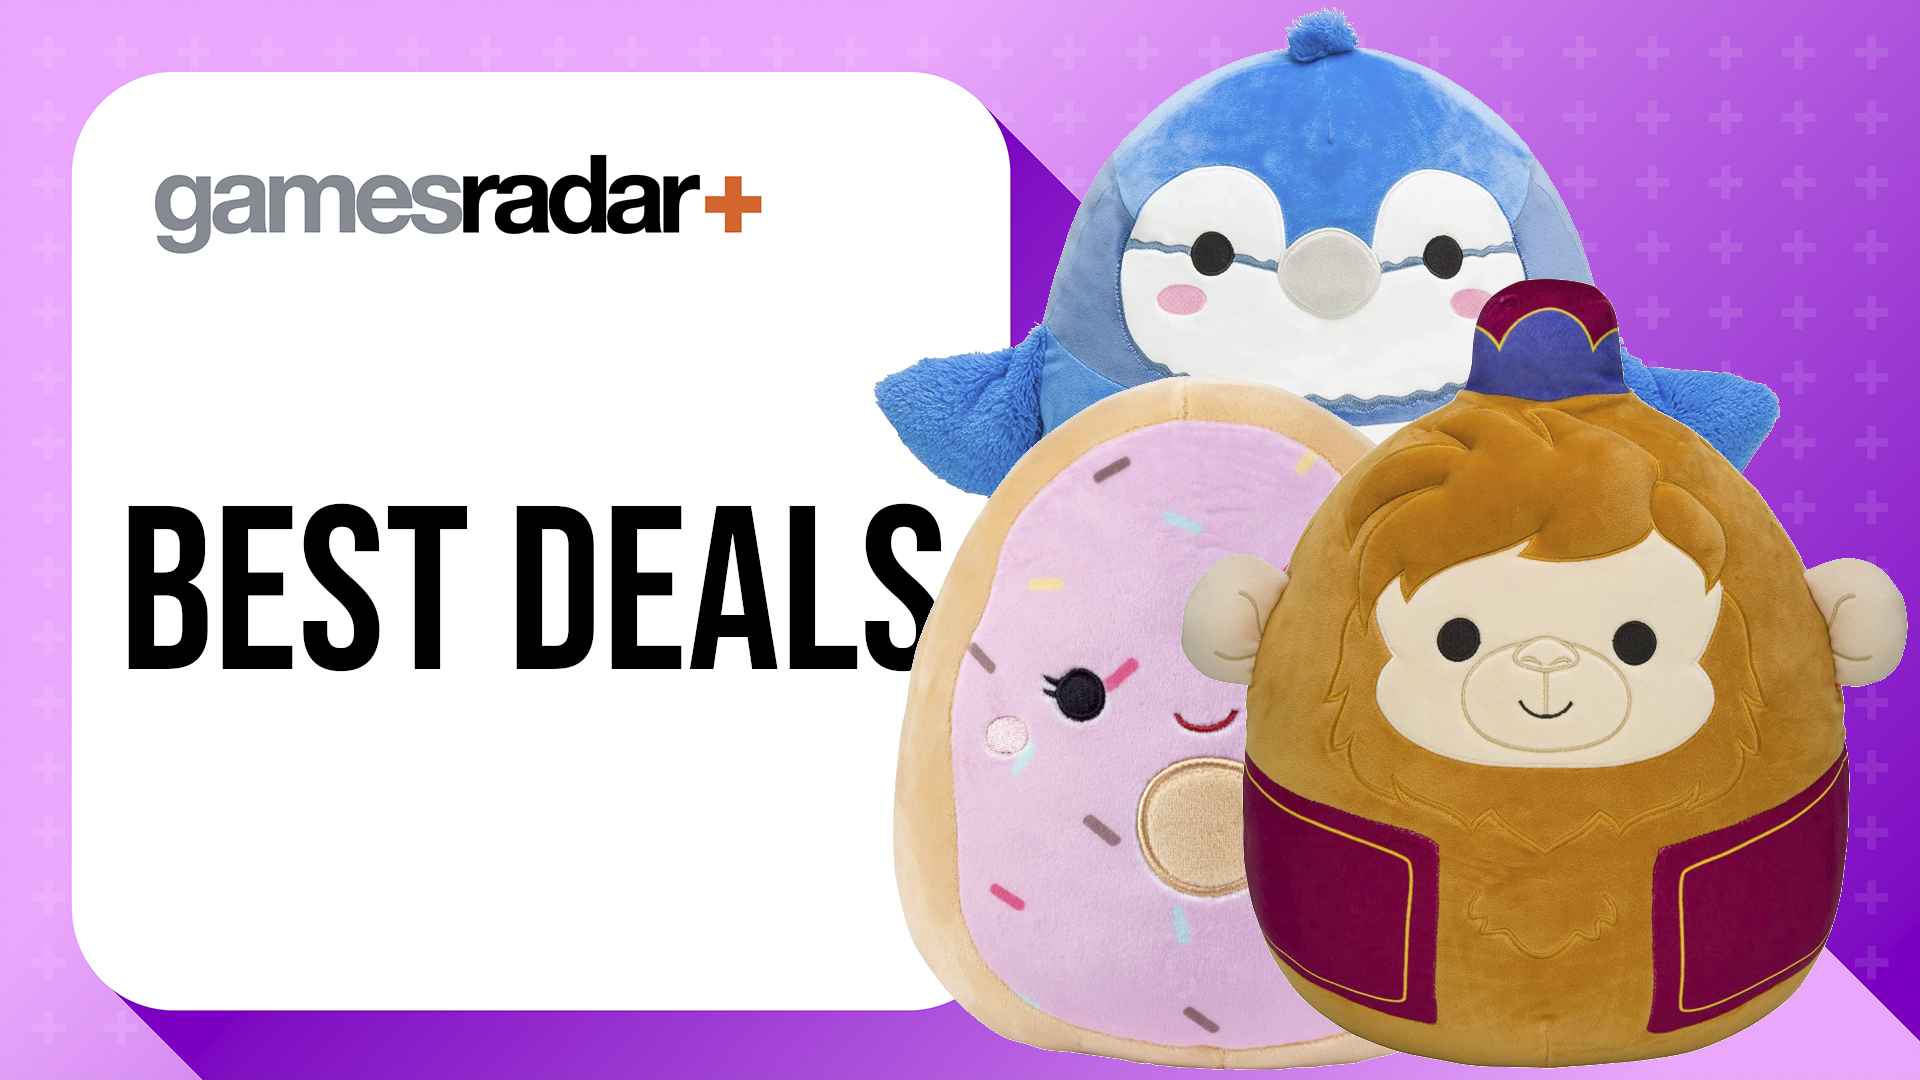 Cyber Monday toy deals with Squishmallows